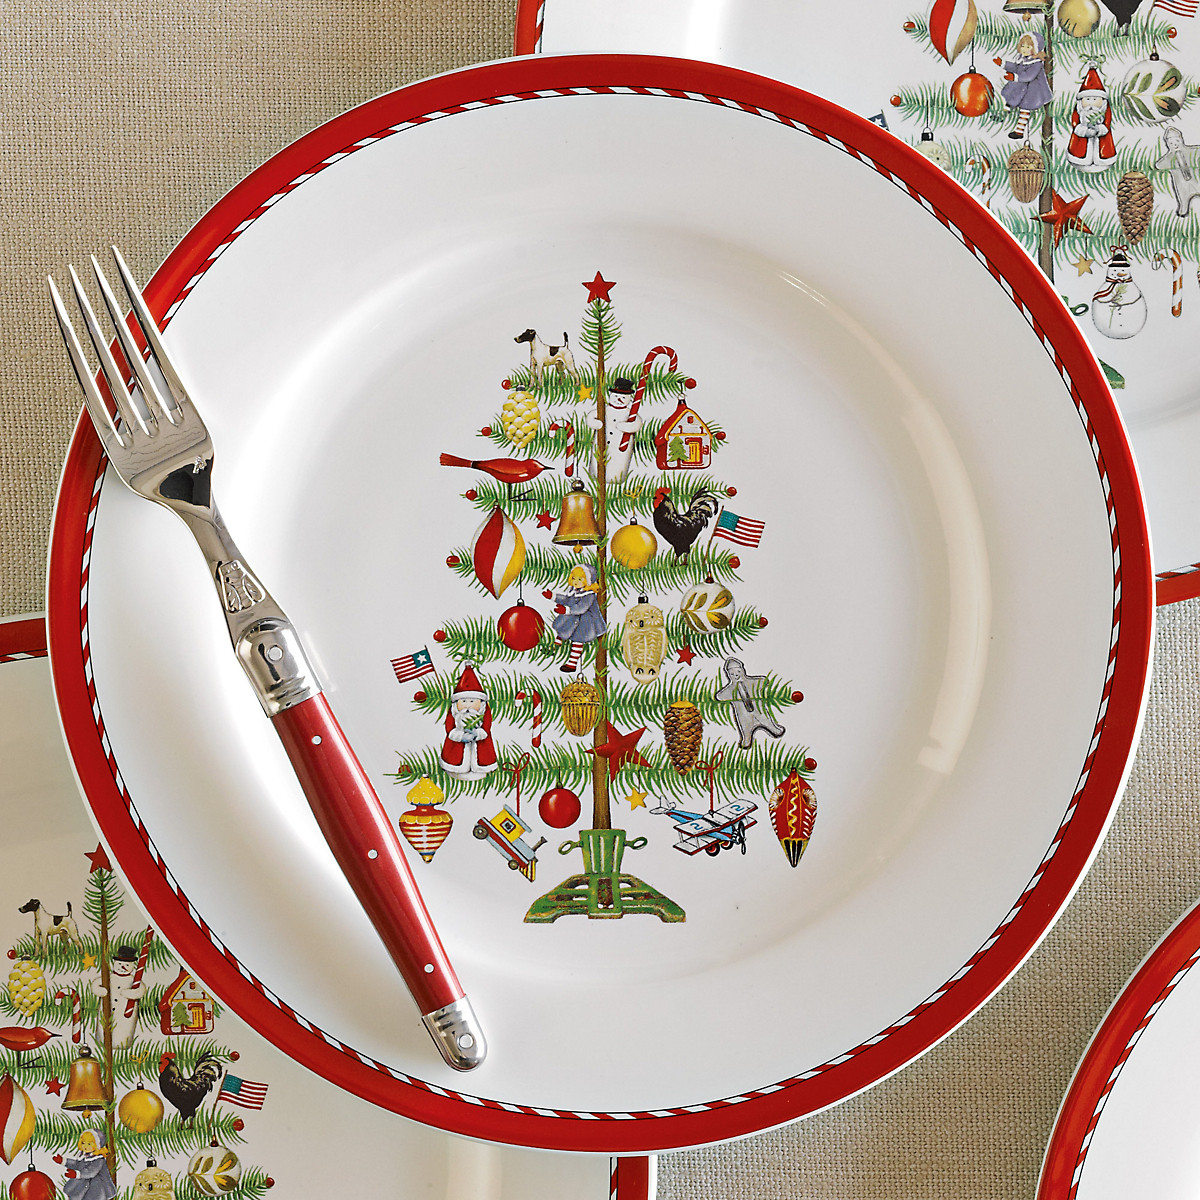 The Best Ideas for Christmas Dinner Plates - Most Popular Ideas of All Time